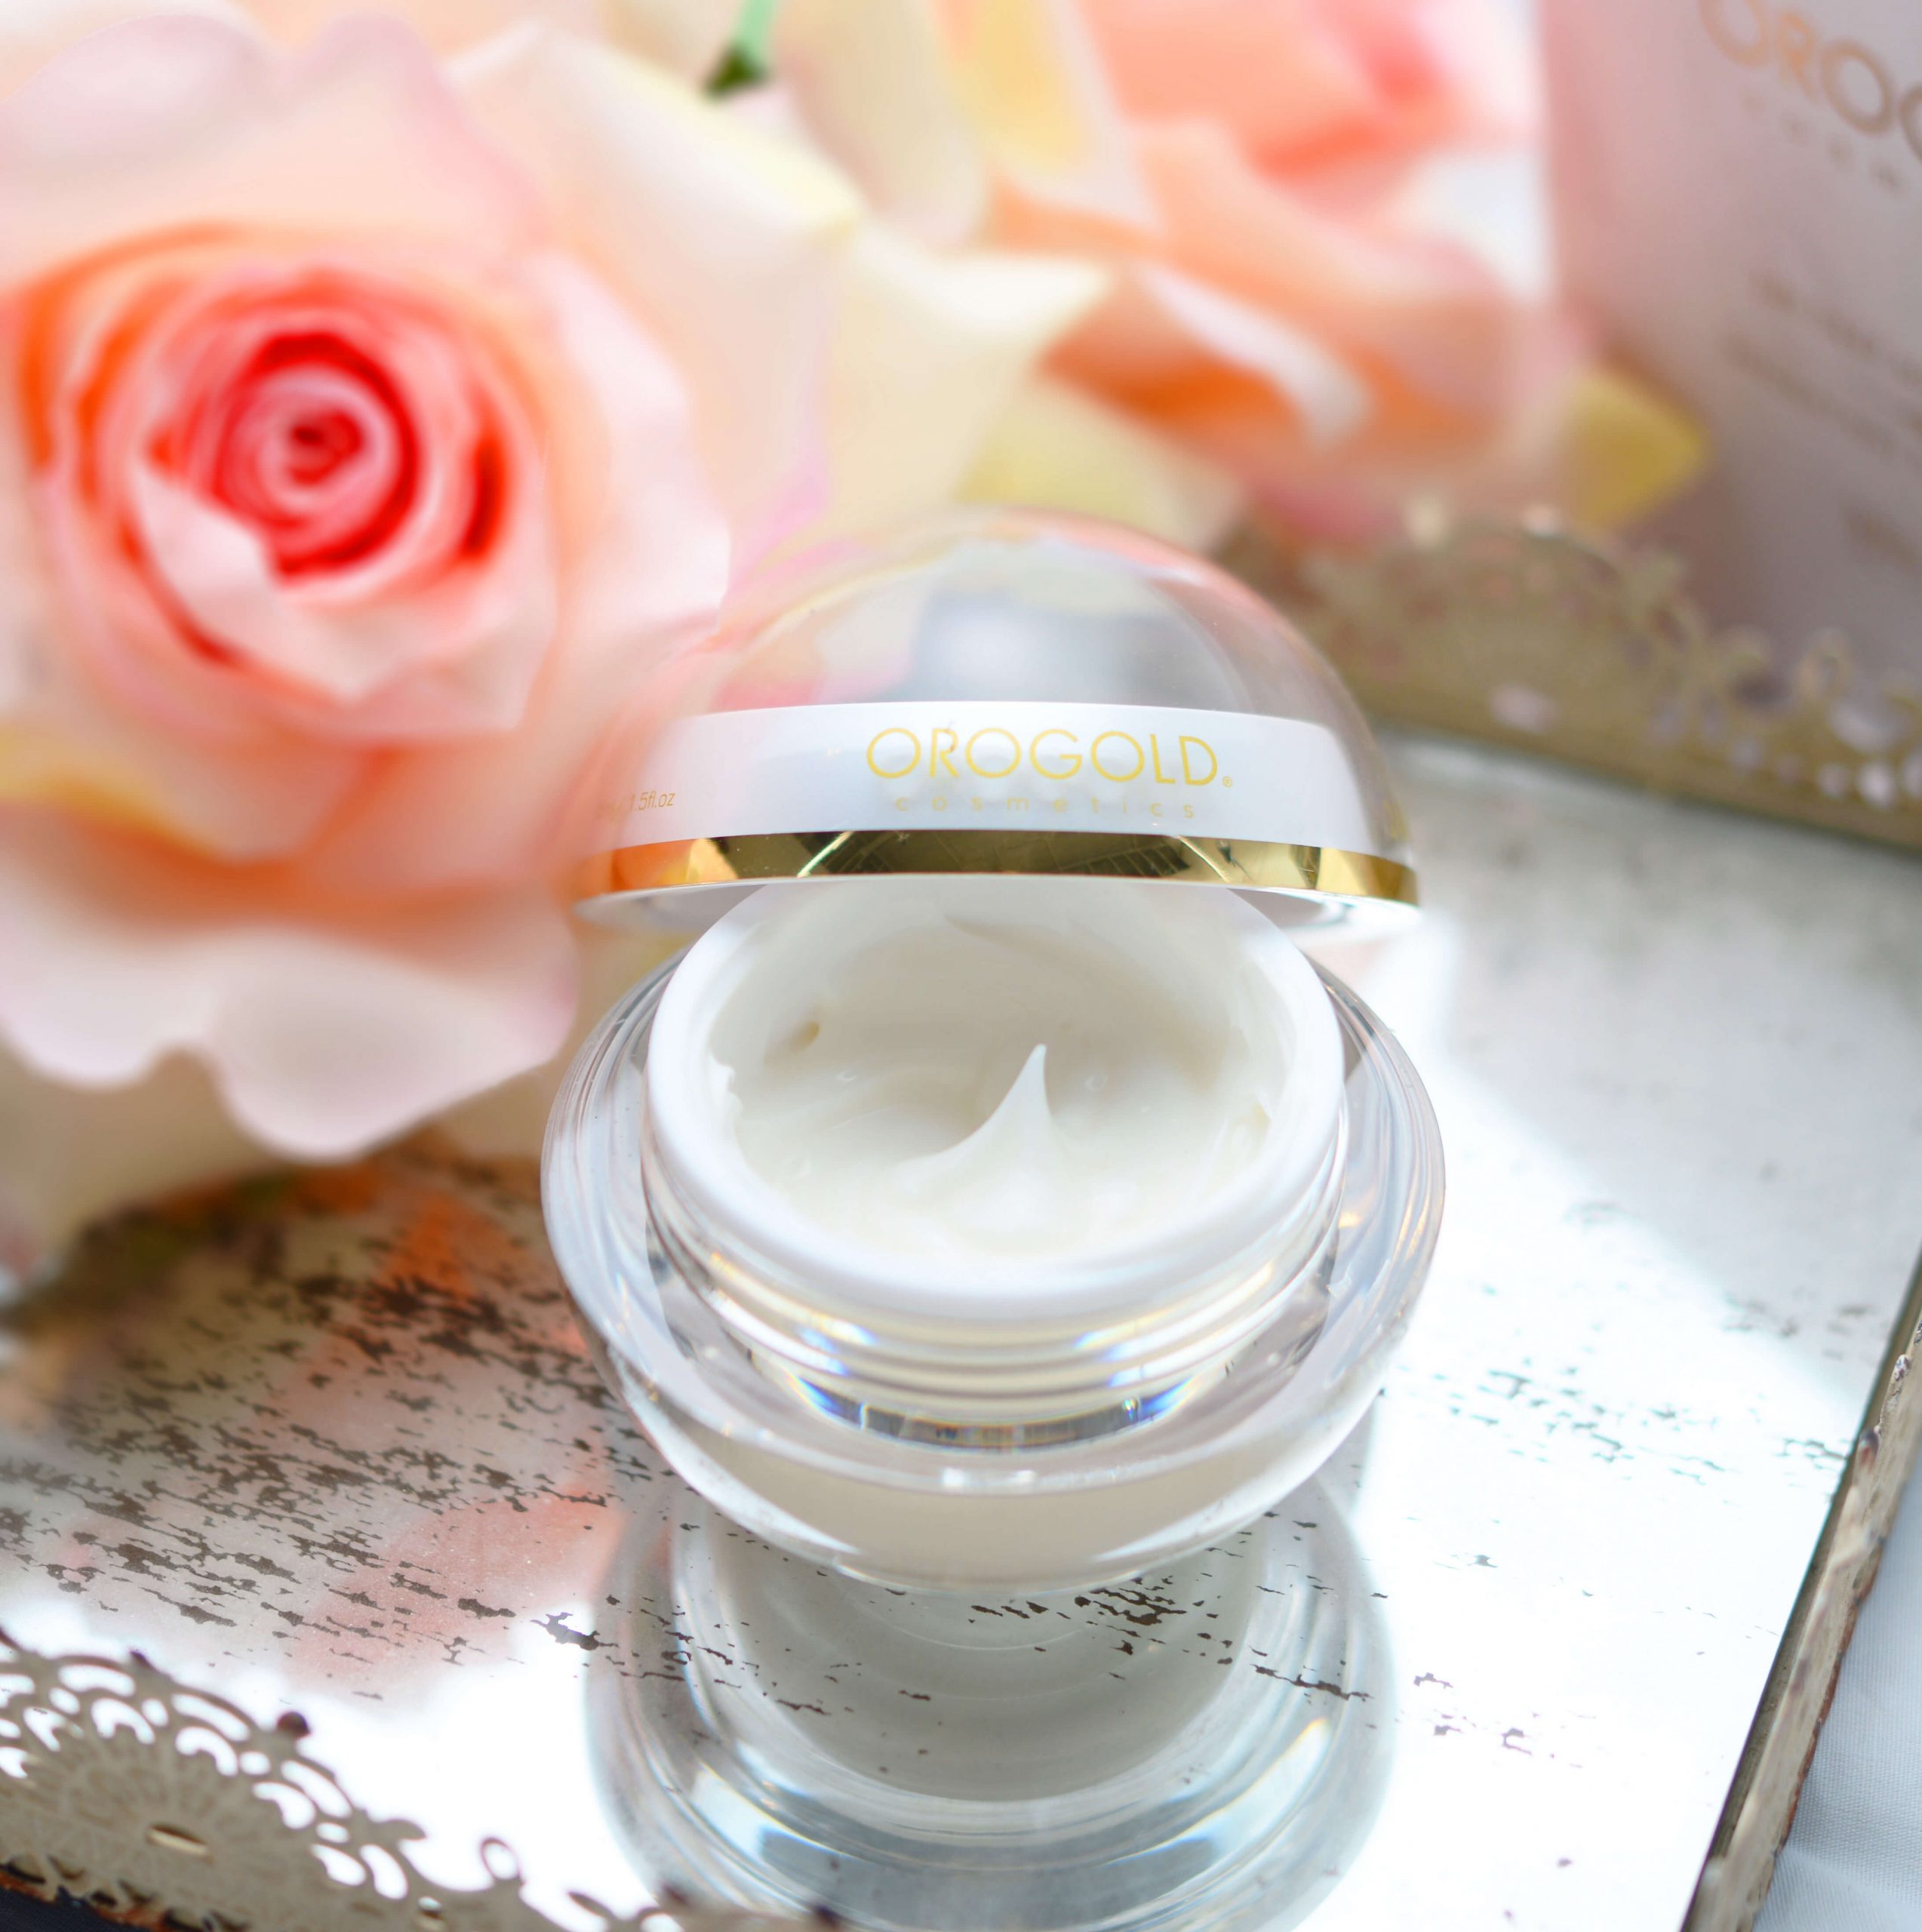 What’s in the OROGOLD 24K Deep Moisturizer?